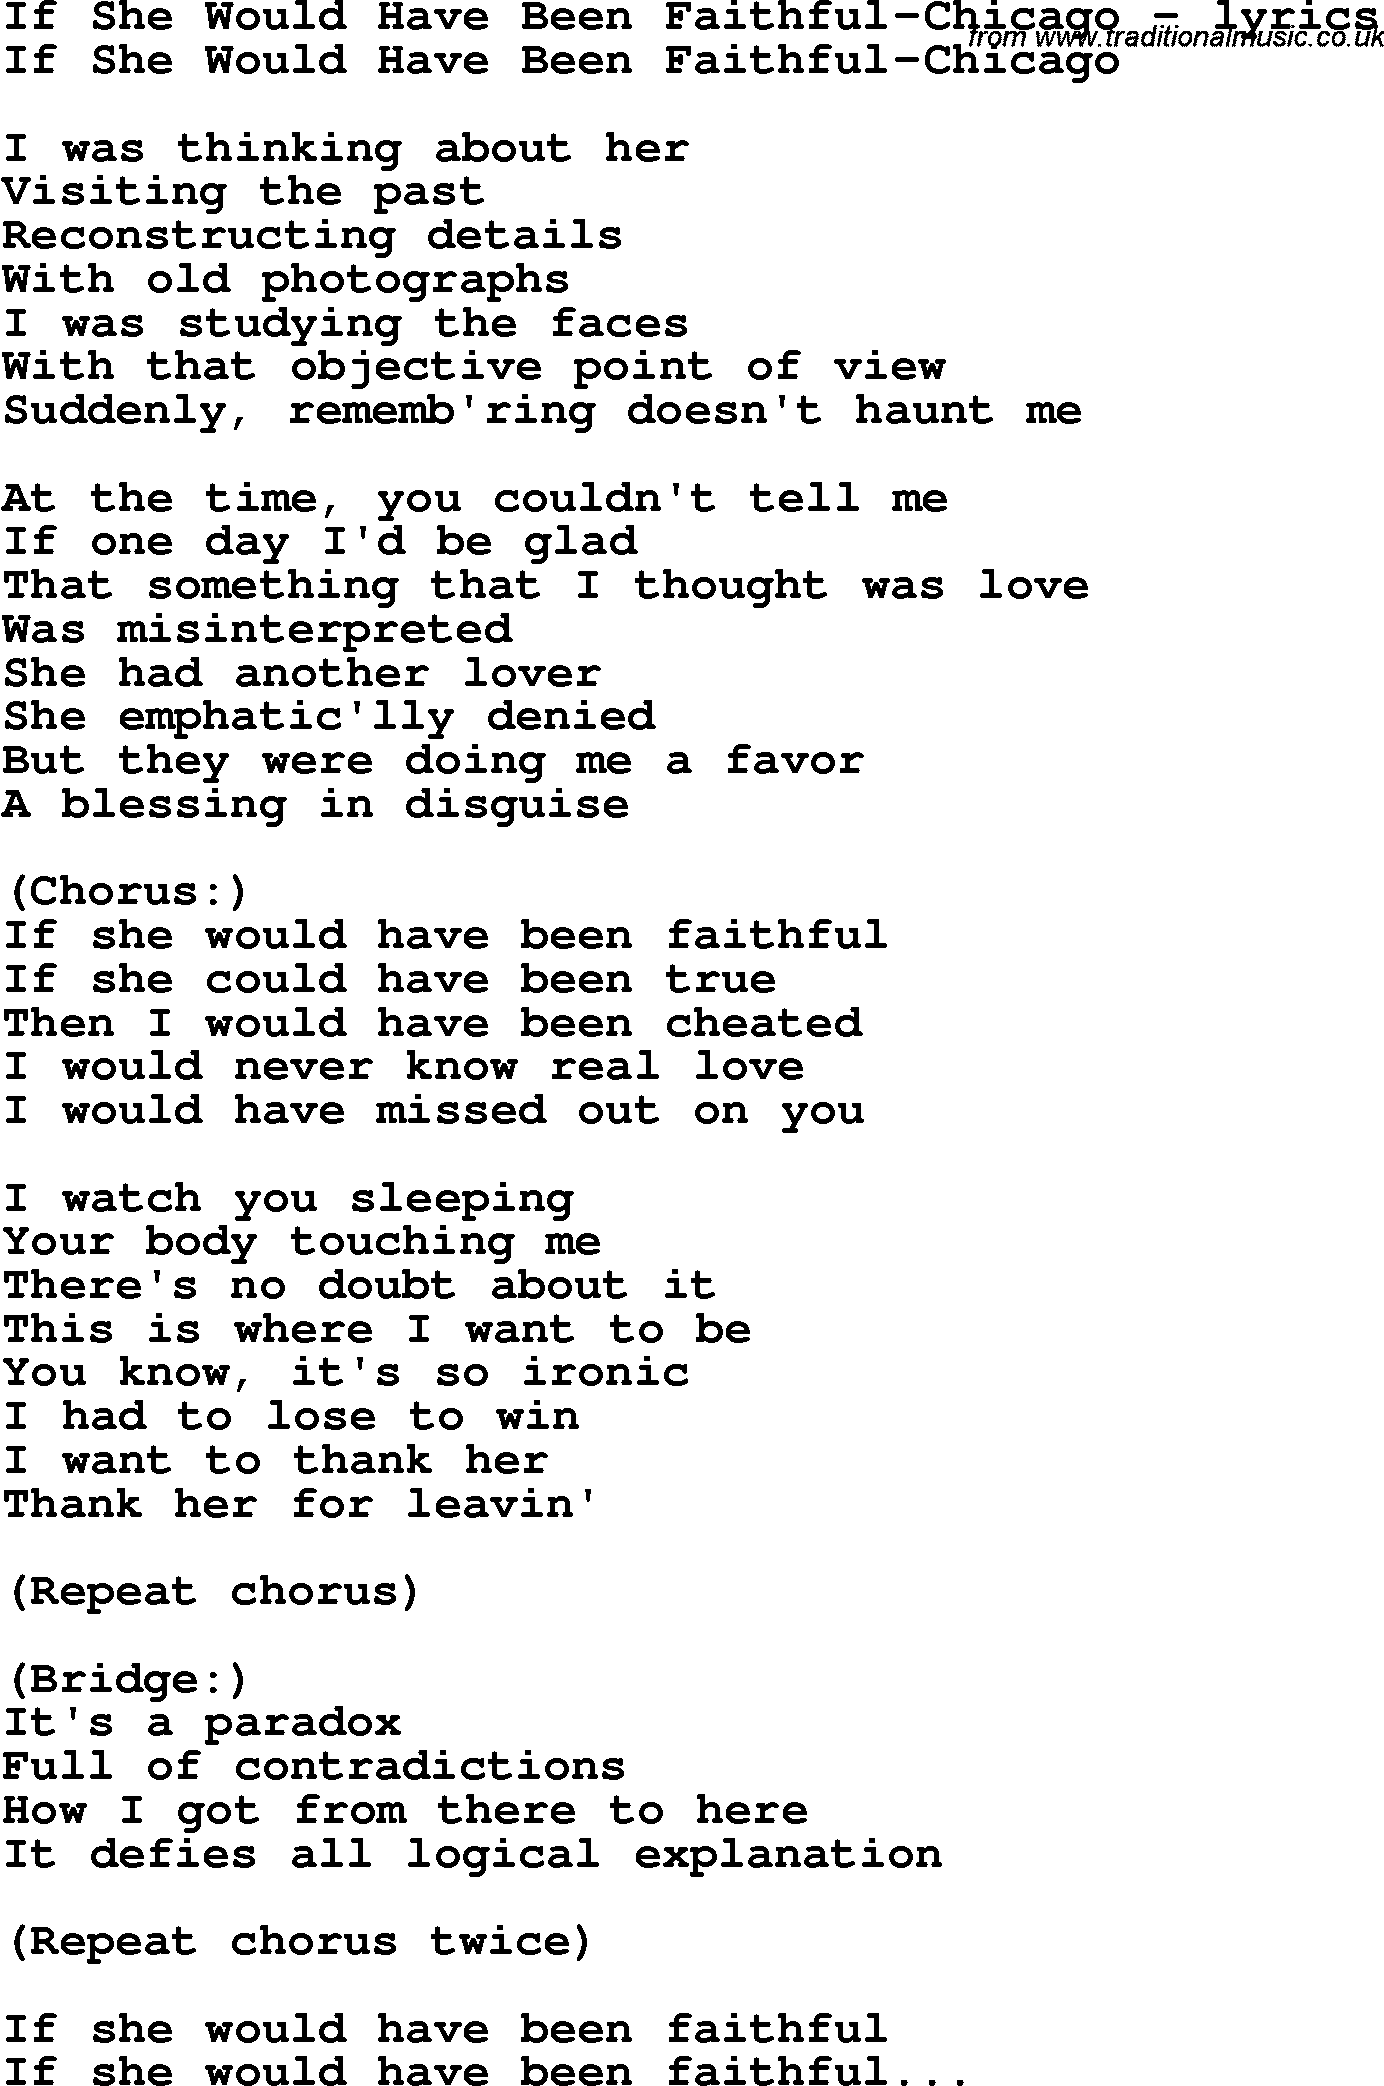 Love Song Lyrics for: If She Would Have Been Faithful-Chicago